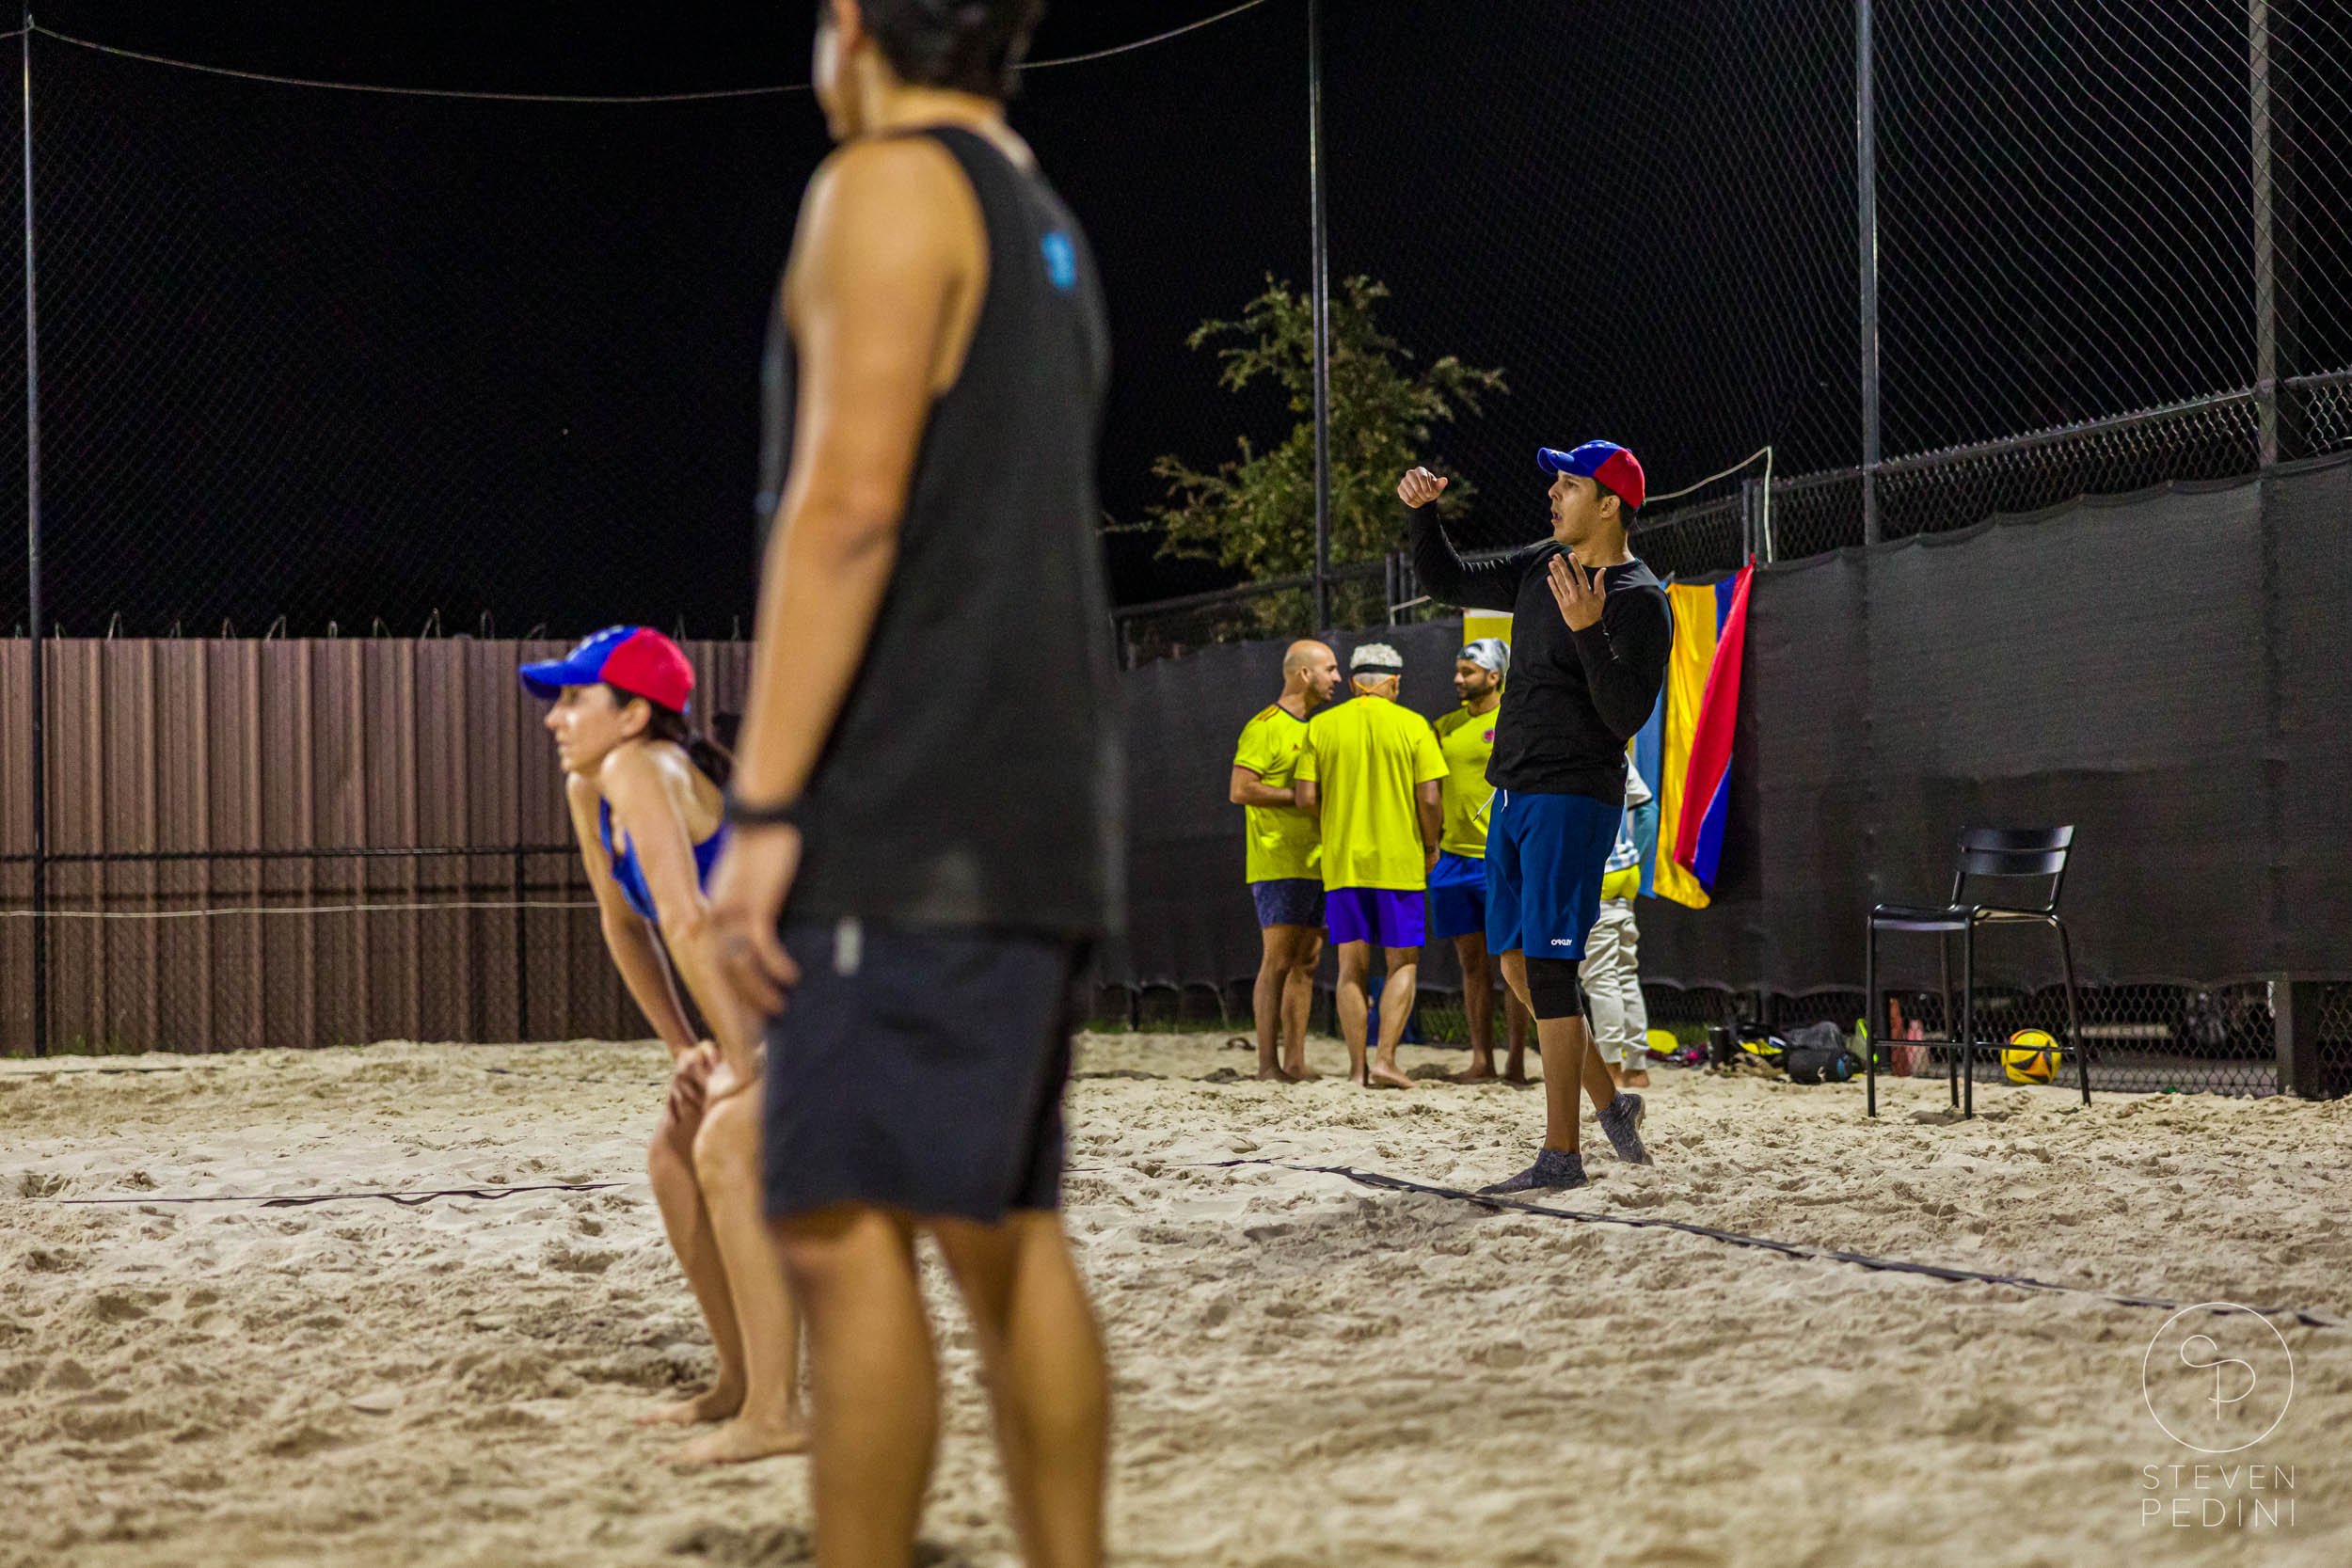 Steven Pedini Photography - Bumpy Pickle - Sand Volleyball - Houston TX - World Cup of Volleyball - 00396.jpg